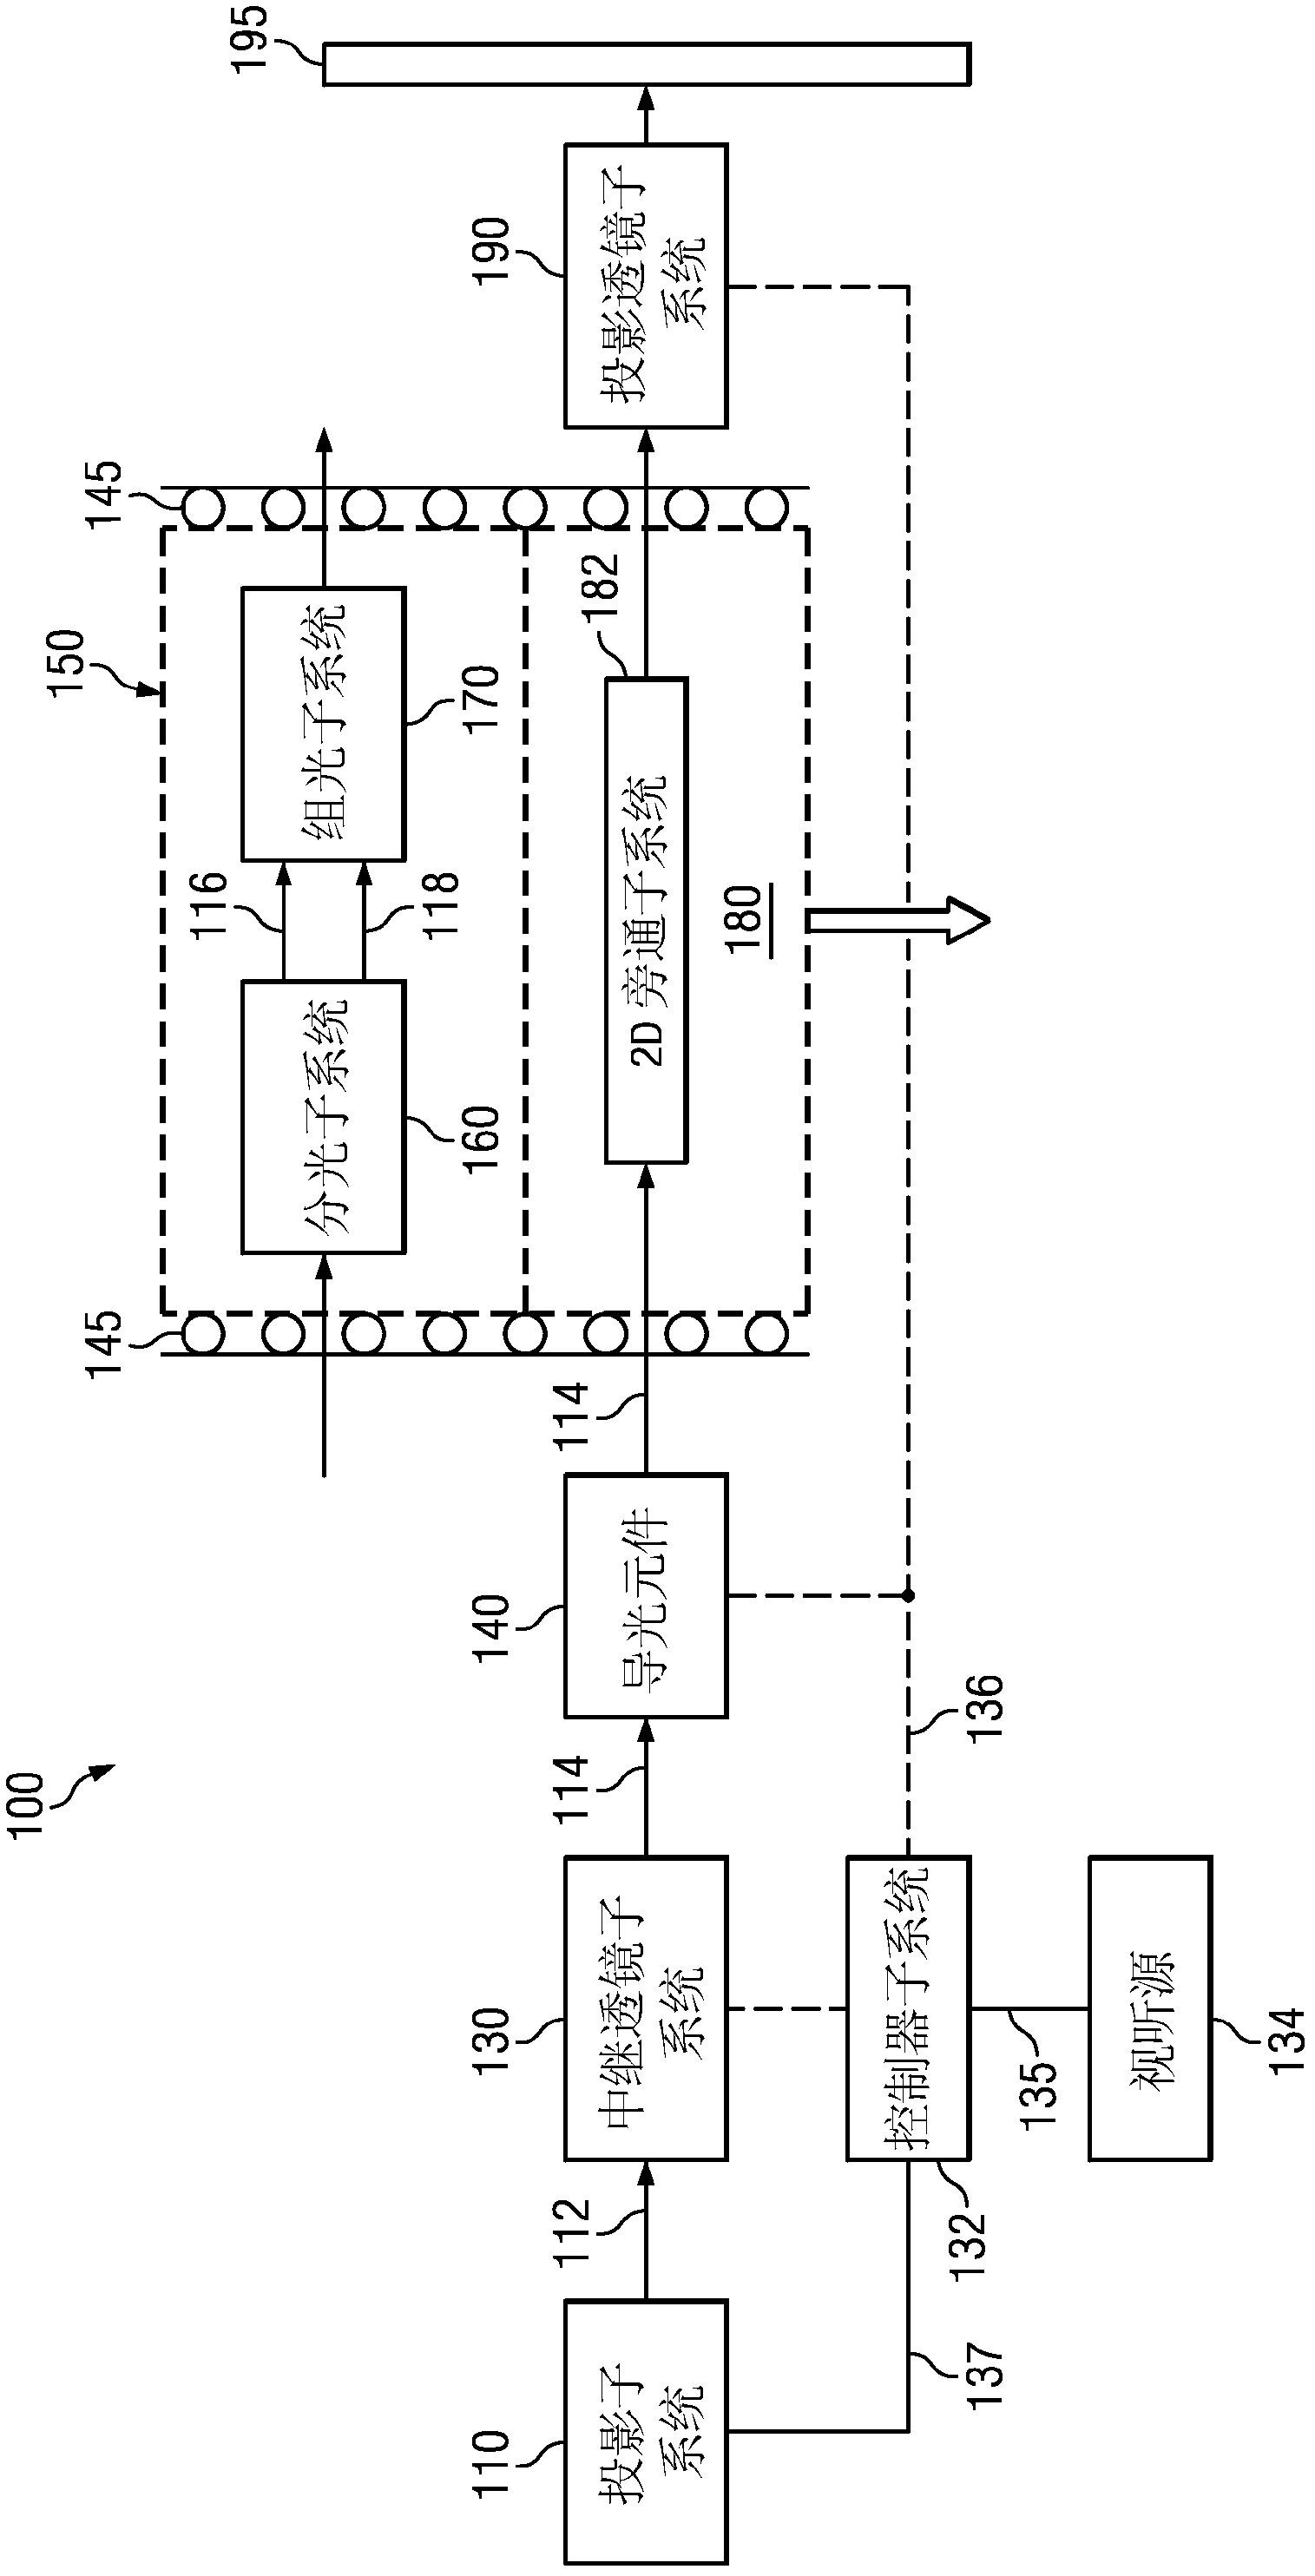 Stereoscopic projection system employing spatial multiplexing at an intermediate image plane